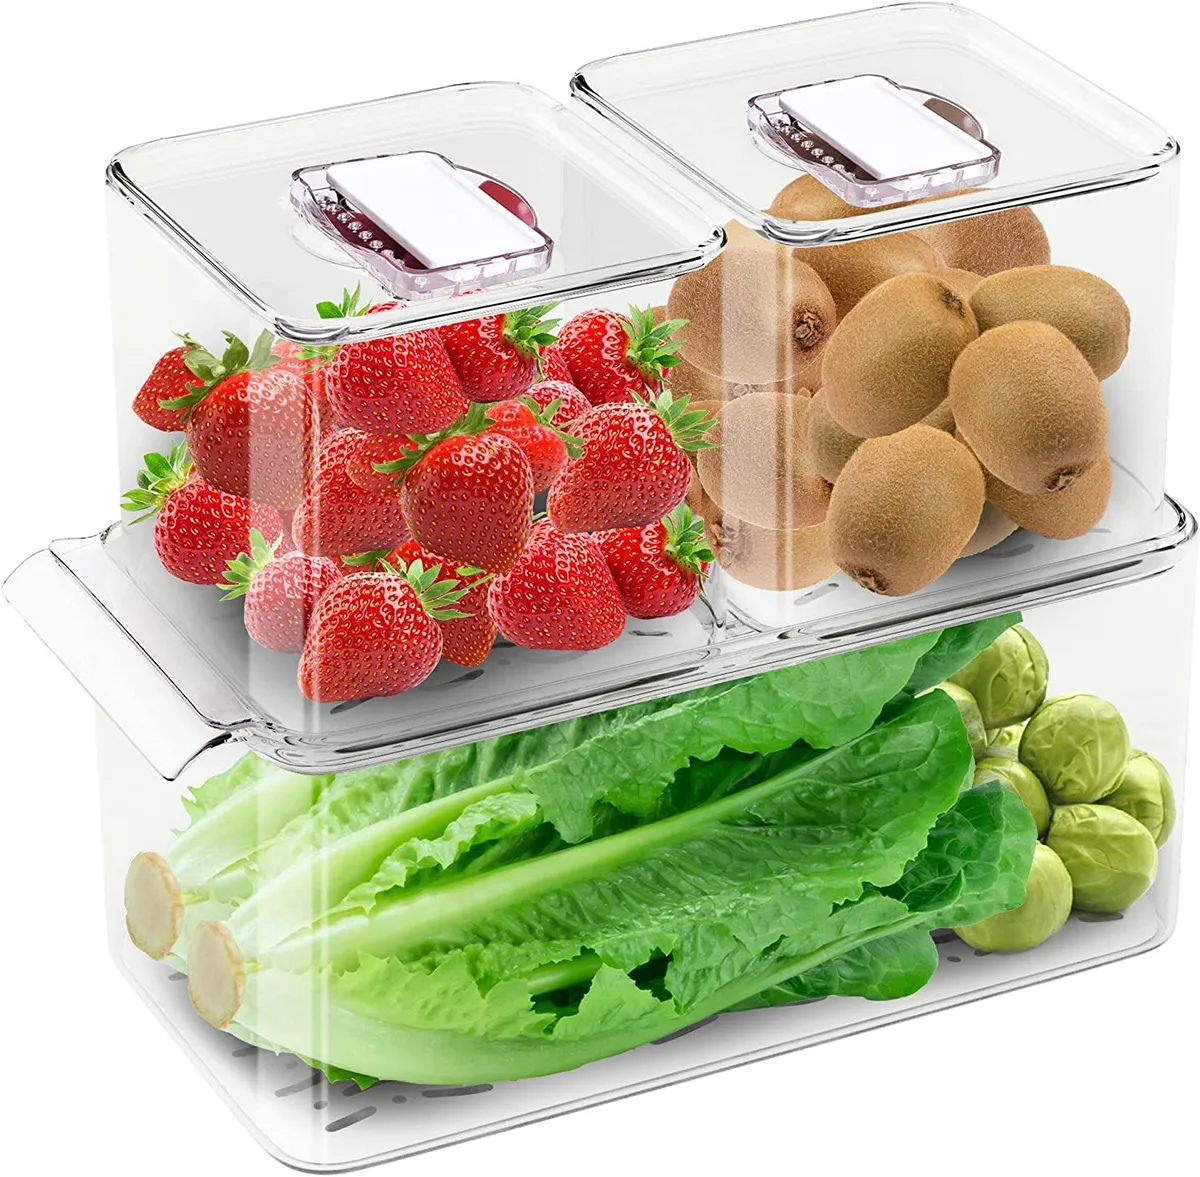 Pretty Comy Fresh Produce Saver Fridge Organizers, Food Storage Containers with Airtight Lid & Colander, Fruit and Vegetable Storage for Refrigerator, Lettuce